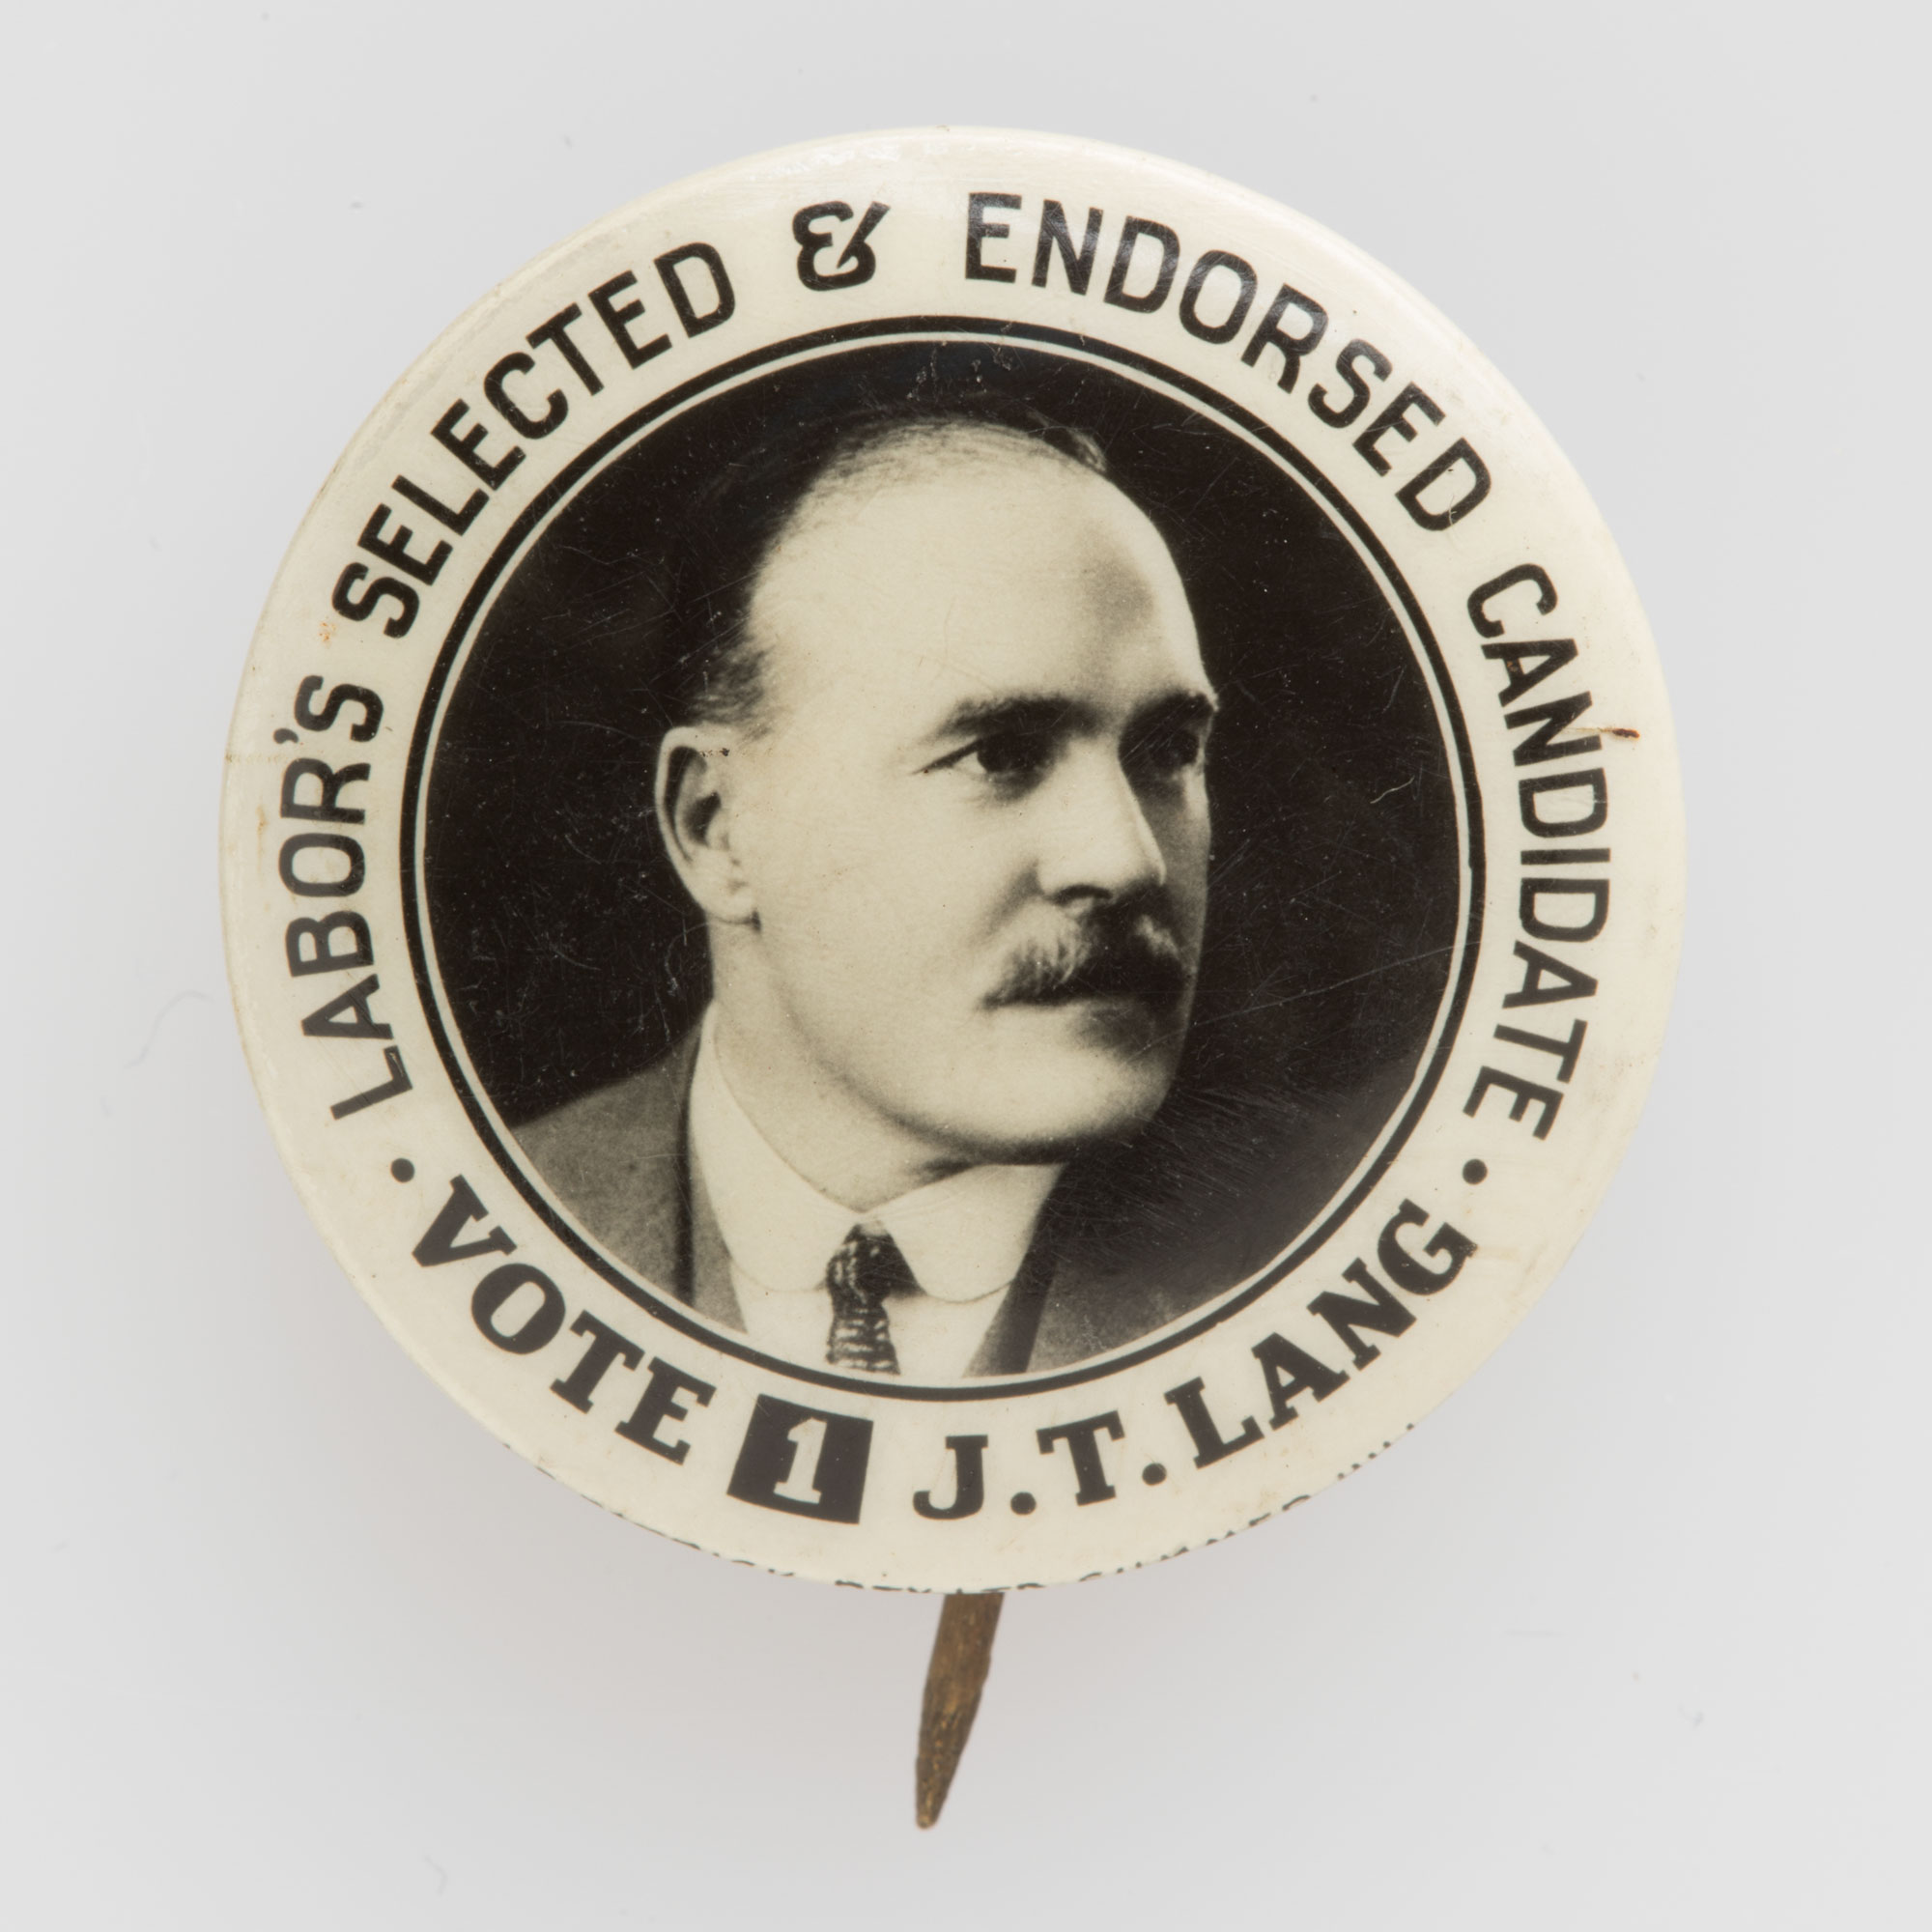 Labor Party electoral campaign badge, with an image of JT (‘Jack’) Lang.